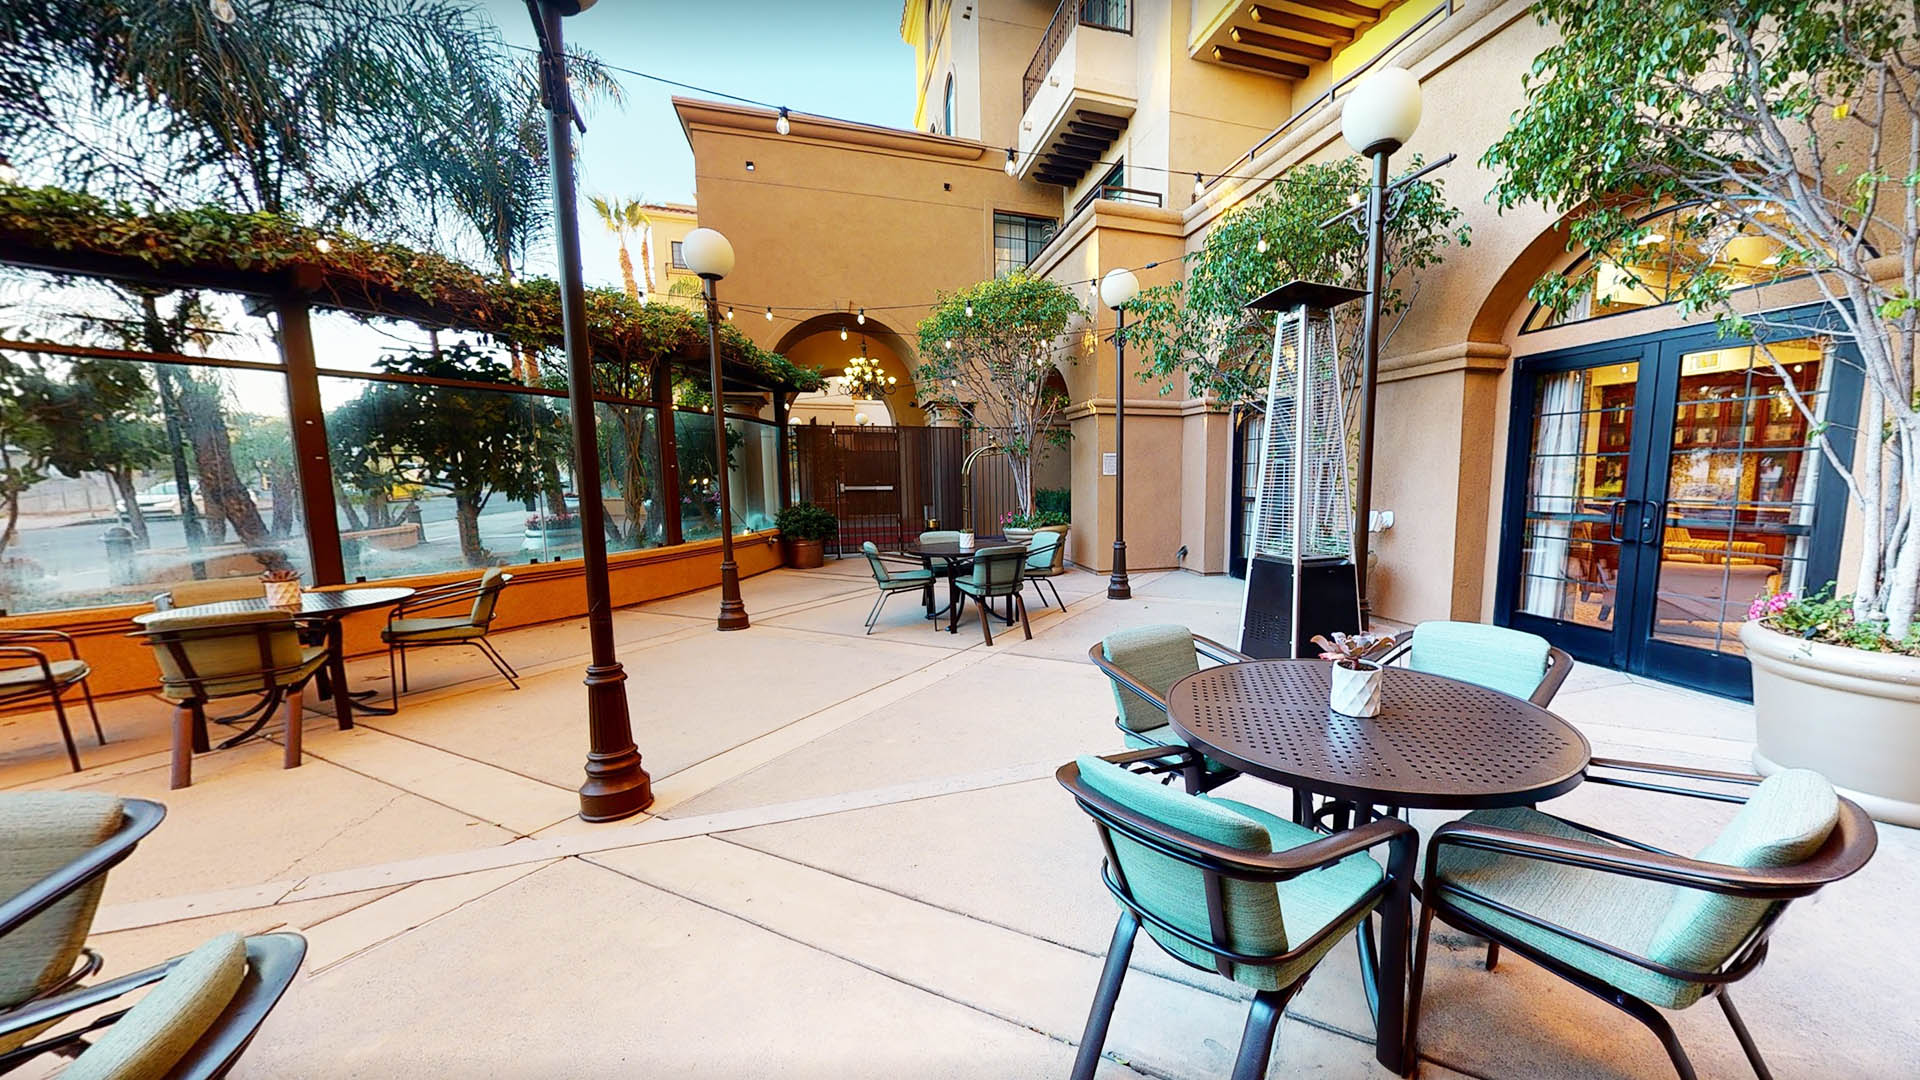 COURTYARD DINING